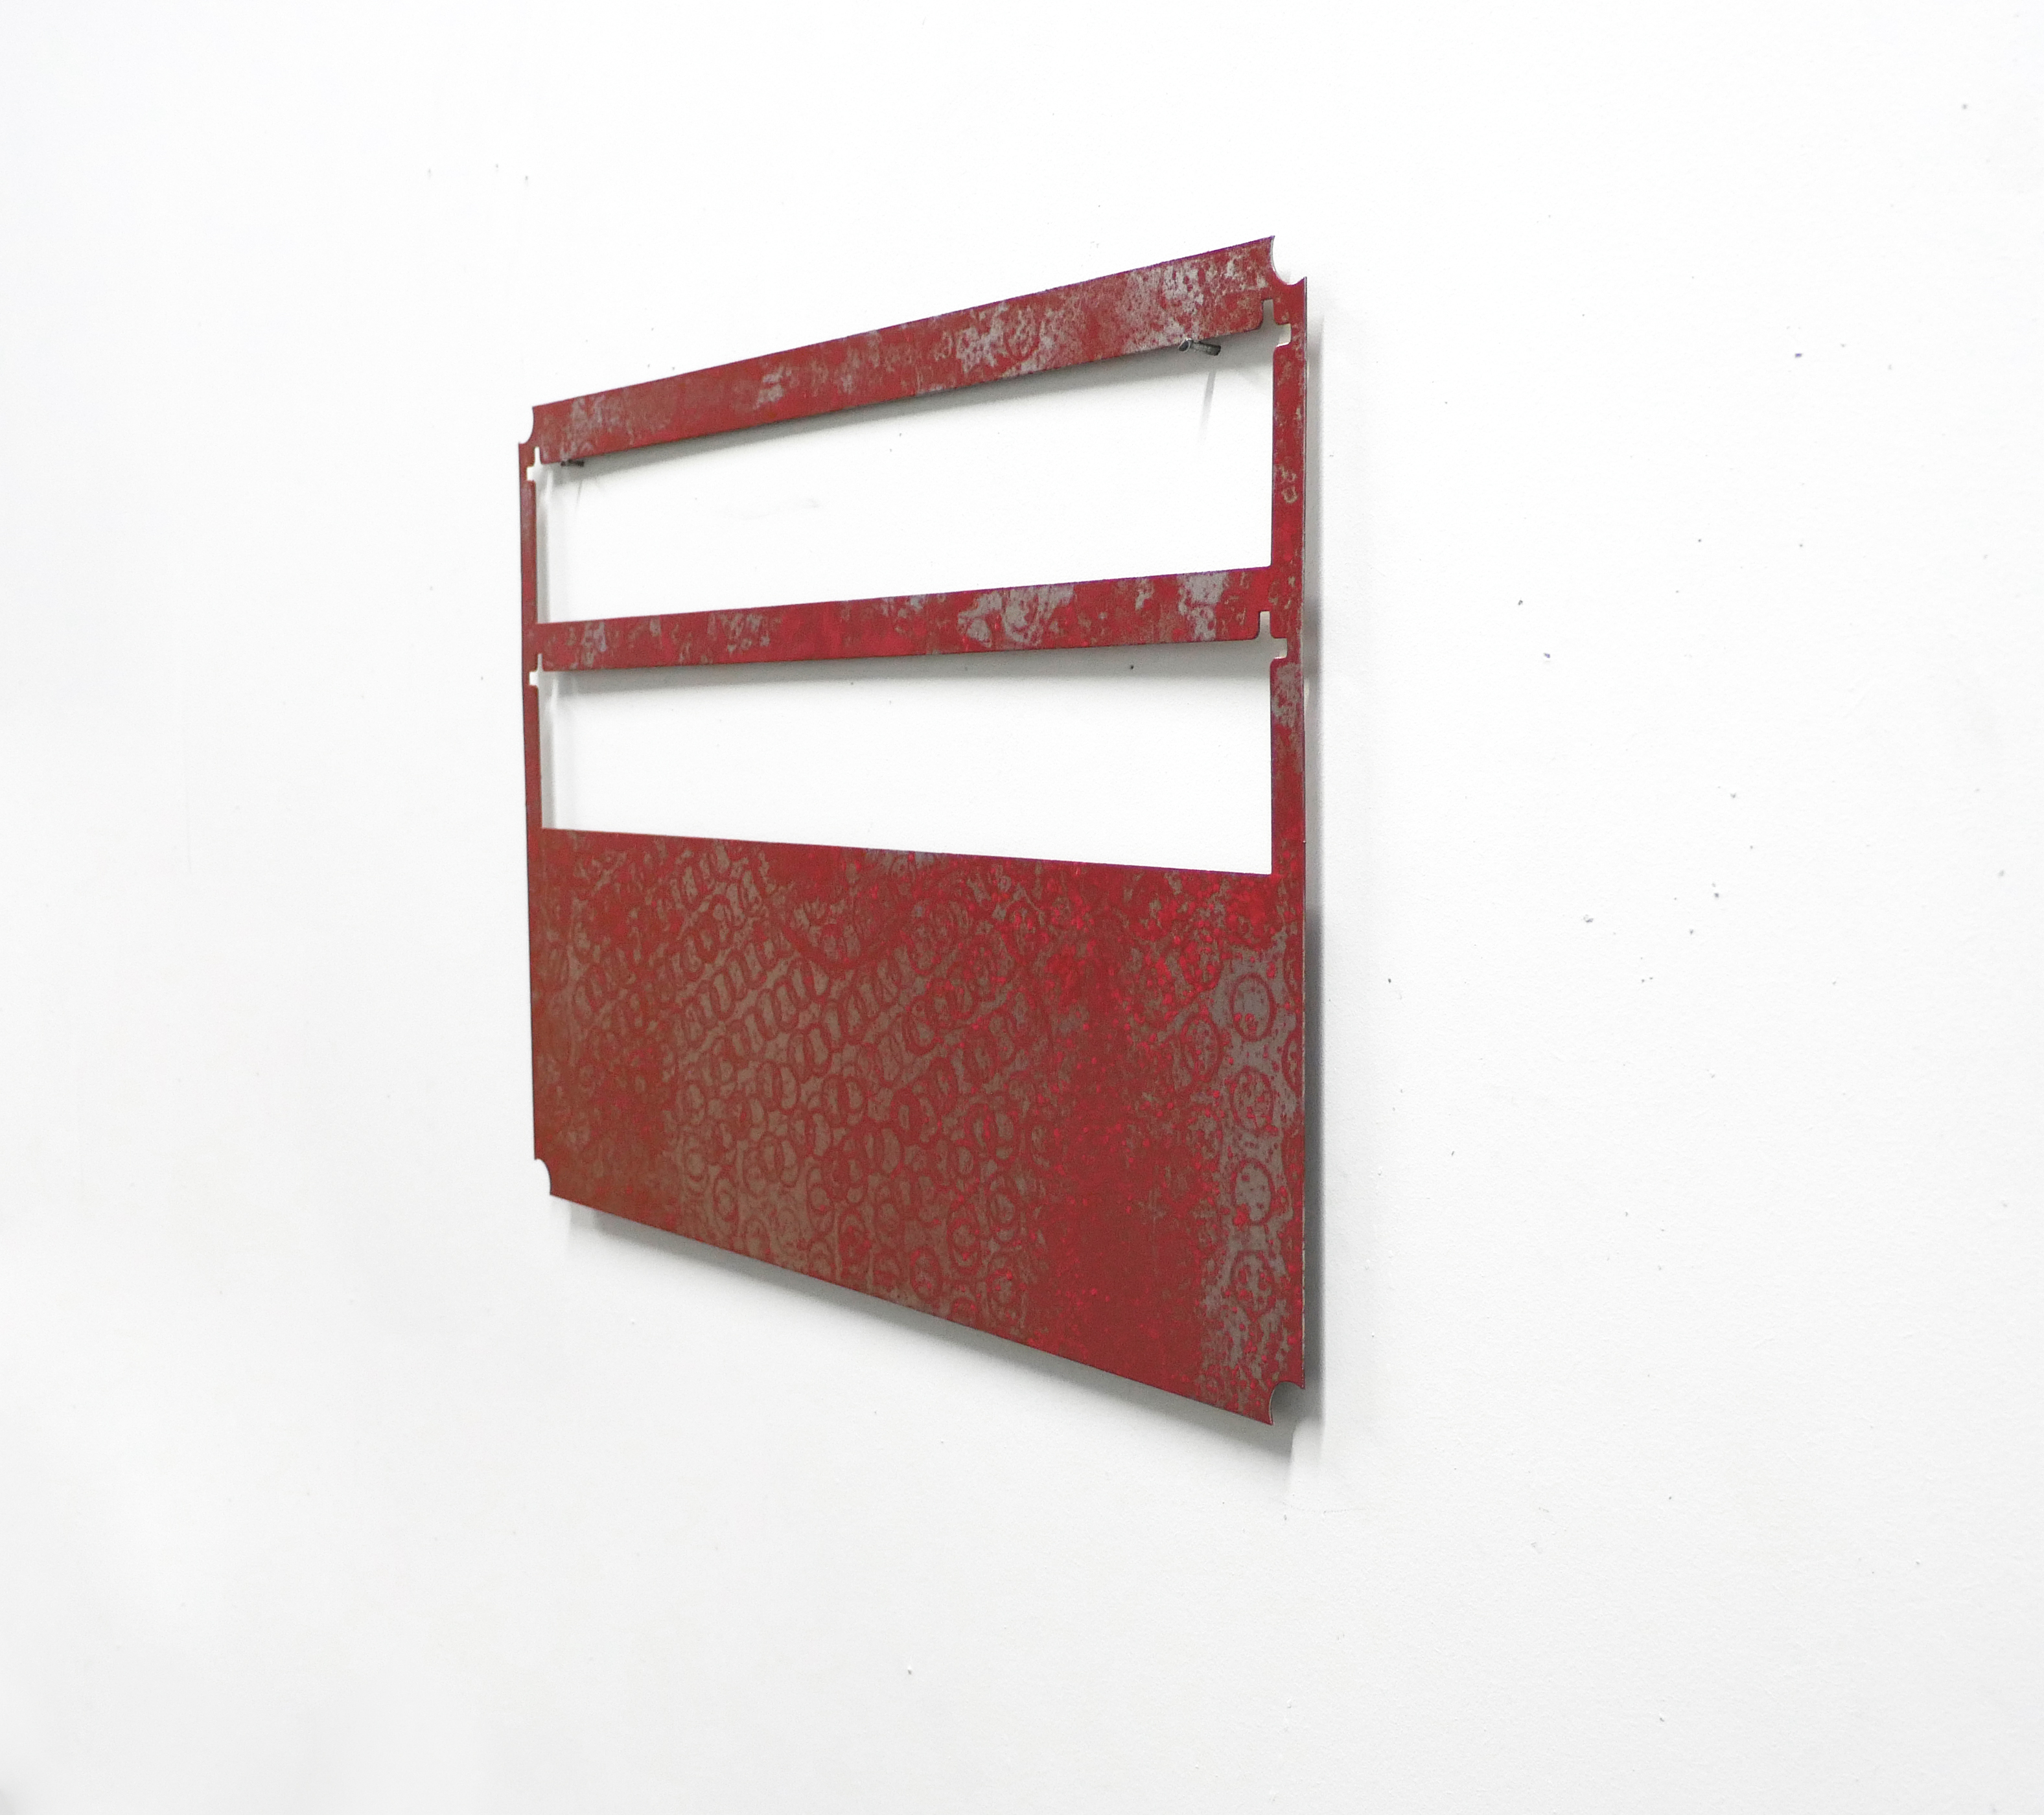 Untitled. Stainless steel and powder coating. 33cm x 40.5cm x 0.2cm. 2022